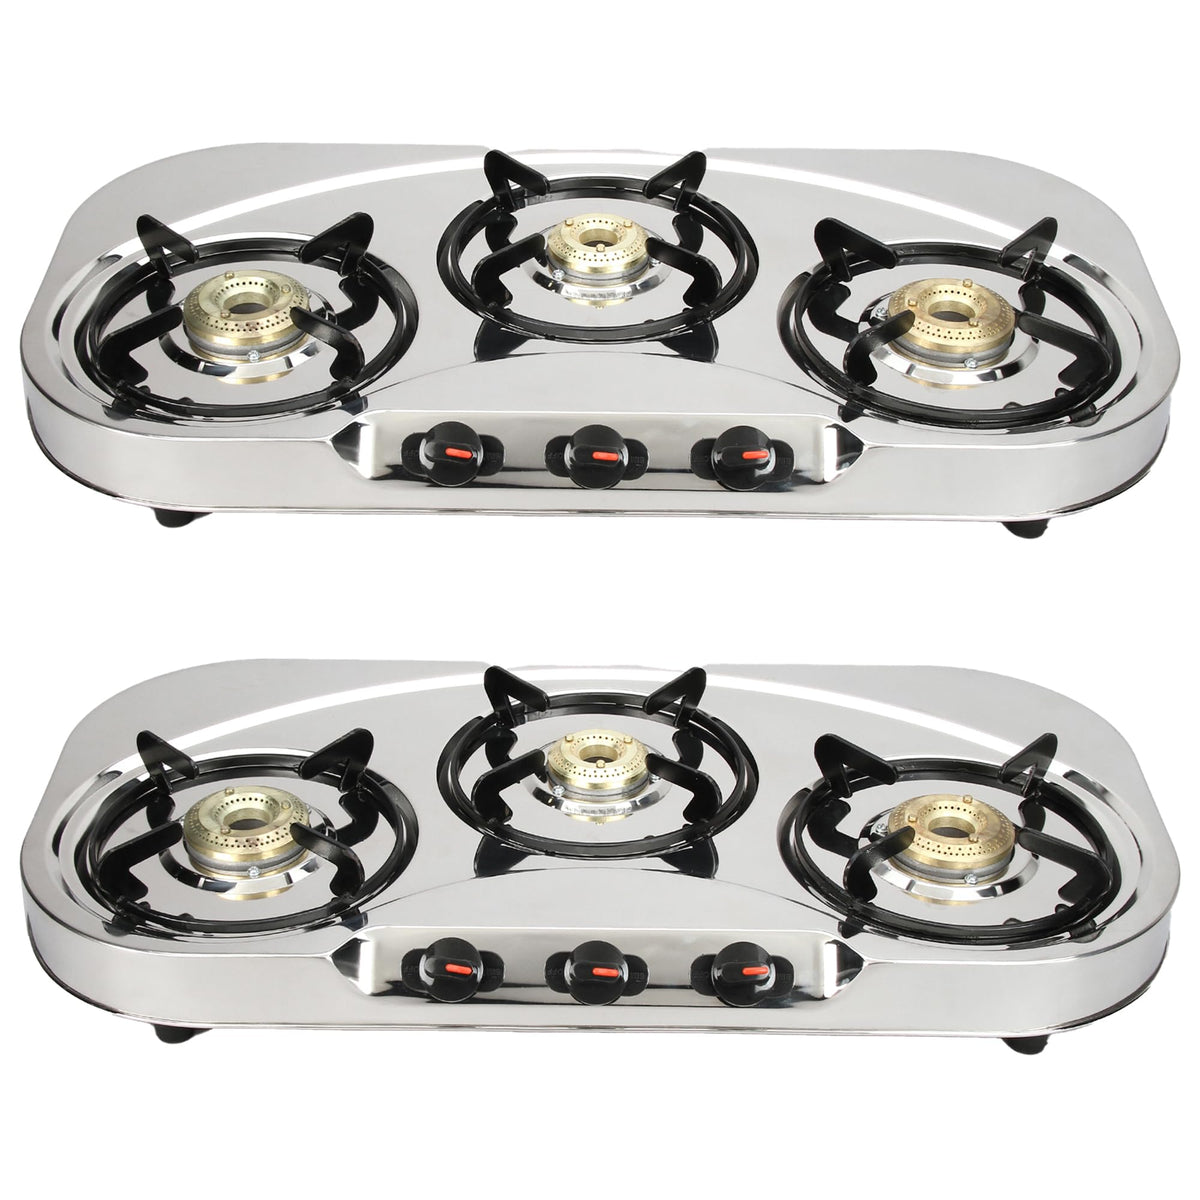 Candes Stainless Steel 3 Burner Manual Oval Gas Stove |Die Cast Alloy Tornado Burner | Gas stove Chulha| Gas Stove 3 burner Steel| LPG Compatible |ISI Certified | Door Step Service| Pack of 2